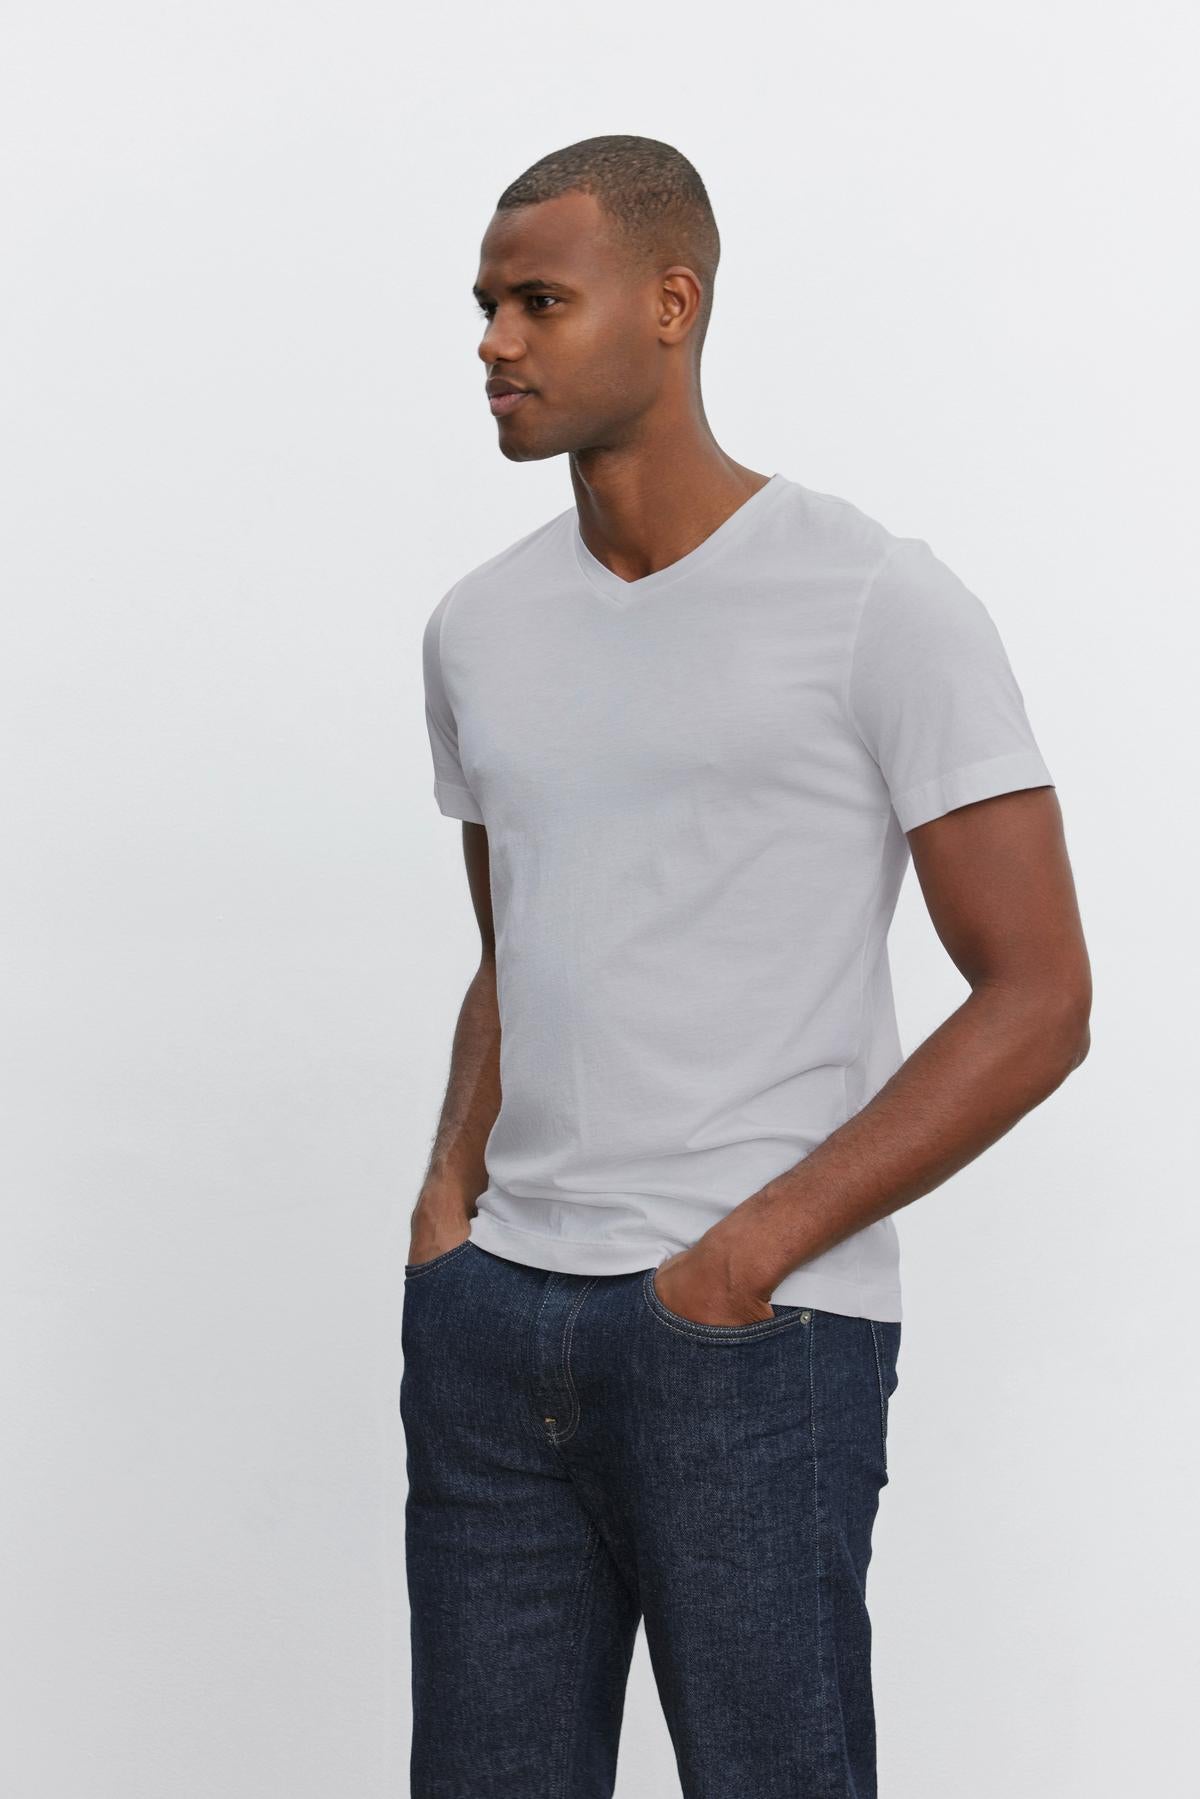 A man with short hair wears a plain light gray SAMSEN TEE made from whisper cotton knit by Velvet by Graham & Spencer and dark blue jeans. He stands and looks to the right with his hands in his pockets, against a plain white background.-37386135371969